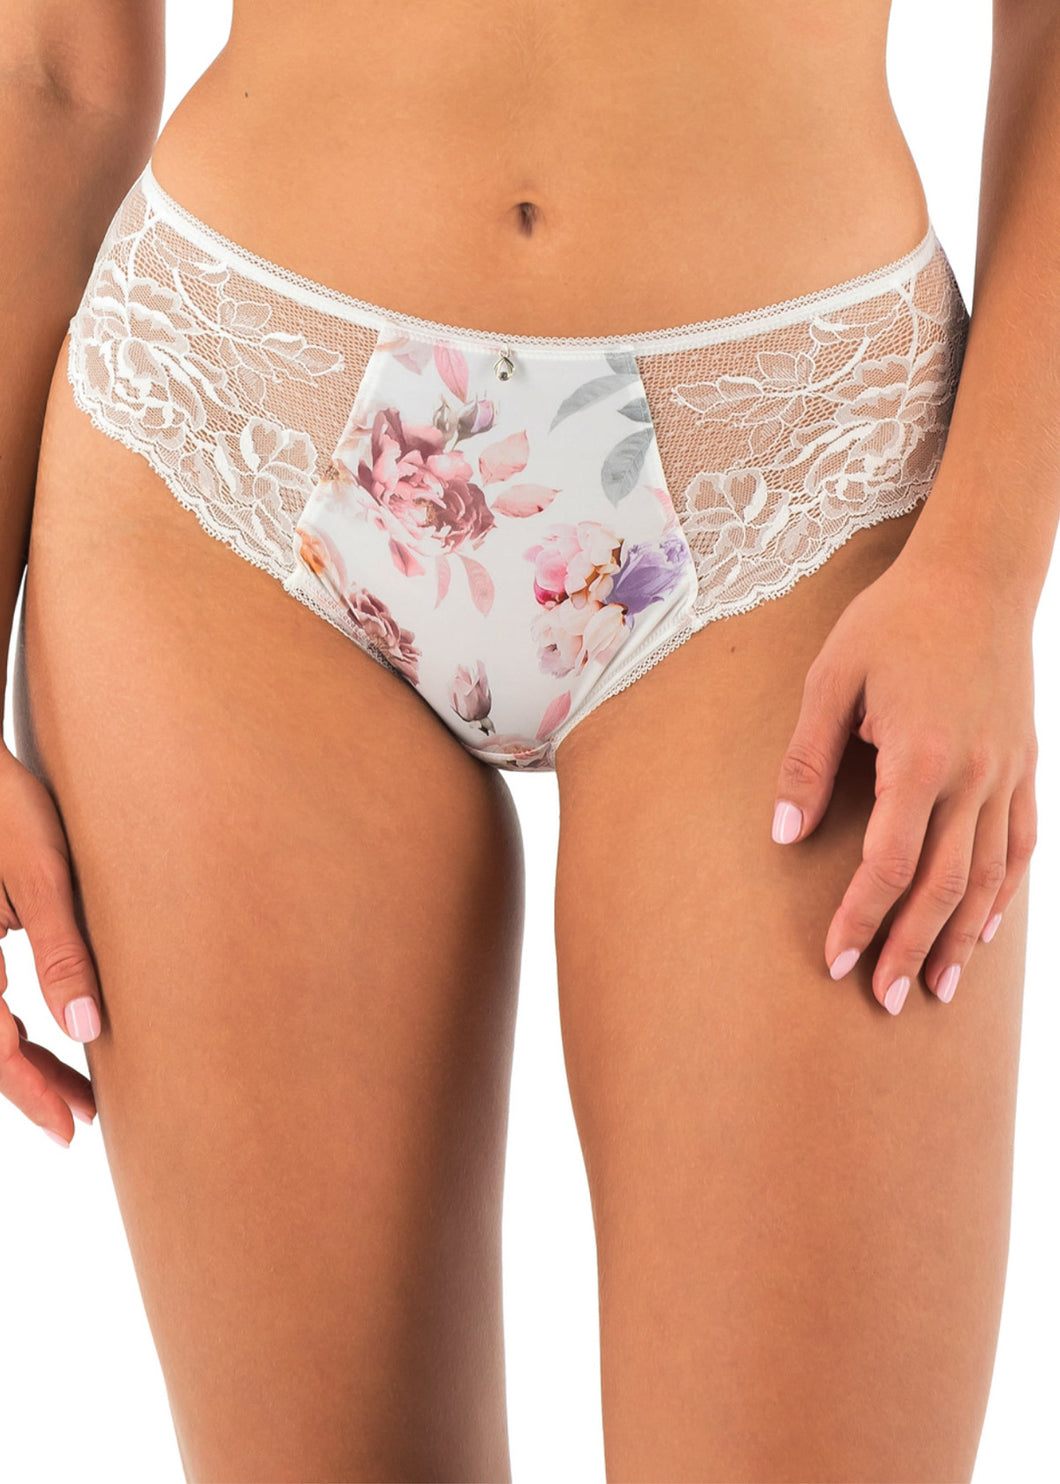 FANTASIE <BR>
Pippa Brief <BR>
White with pink roses <BR>